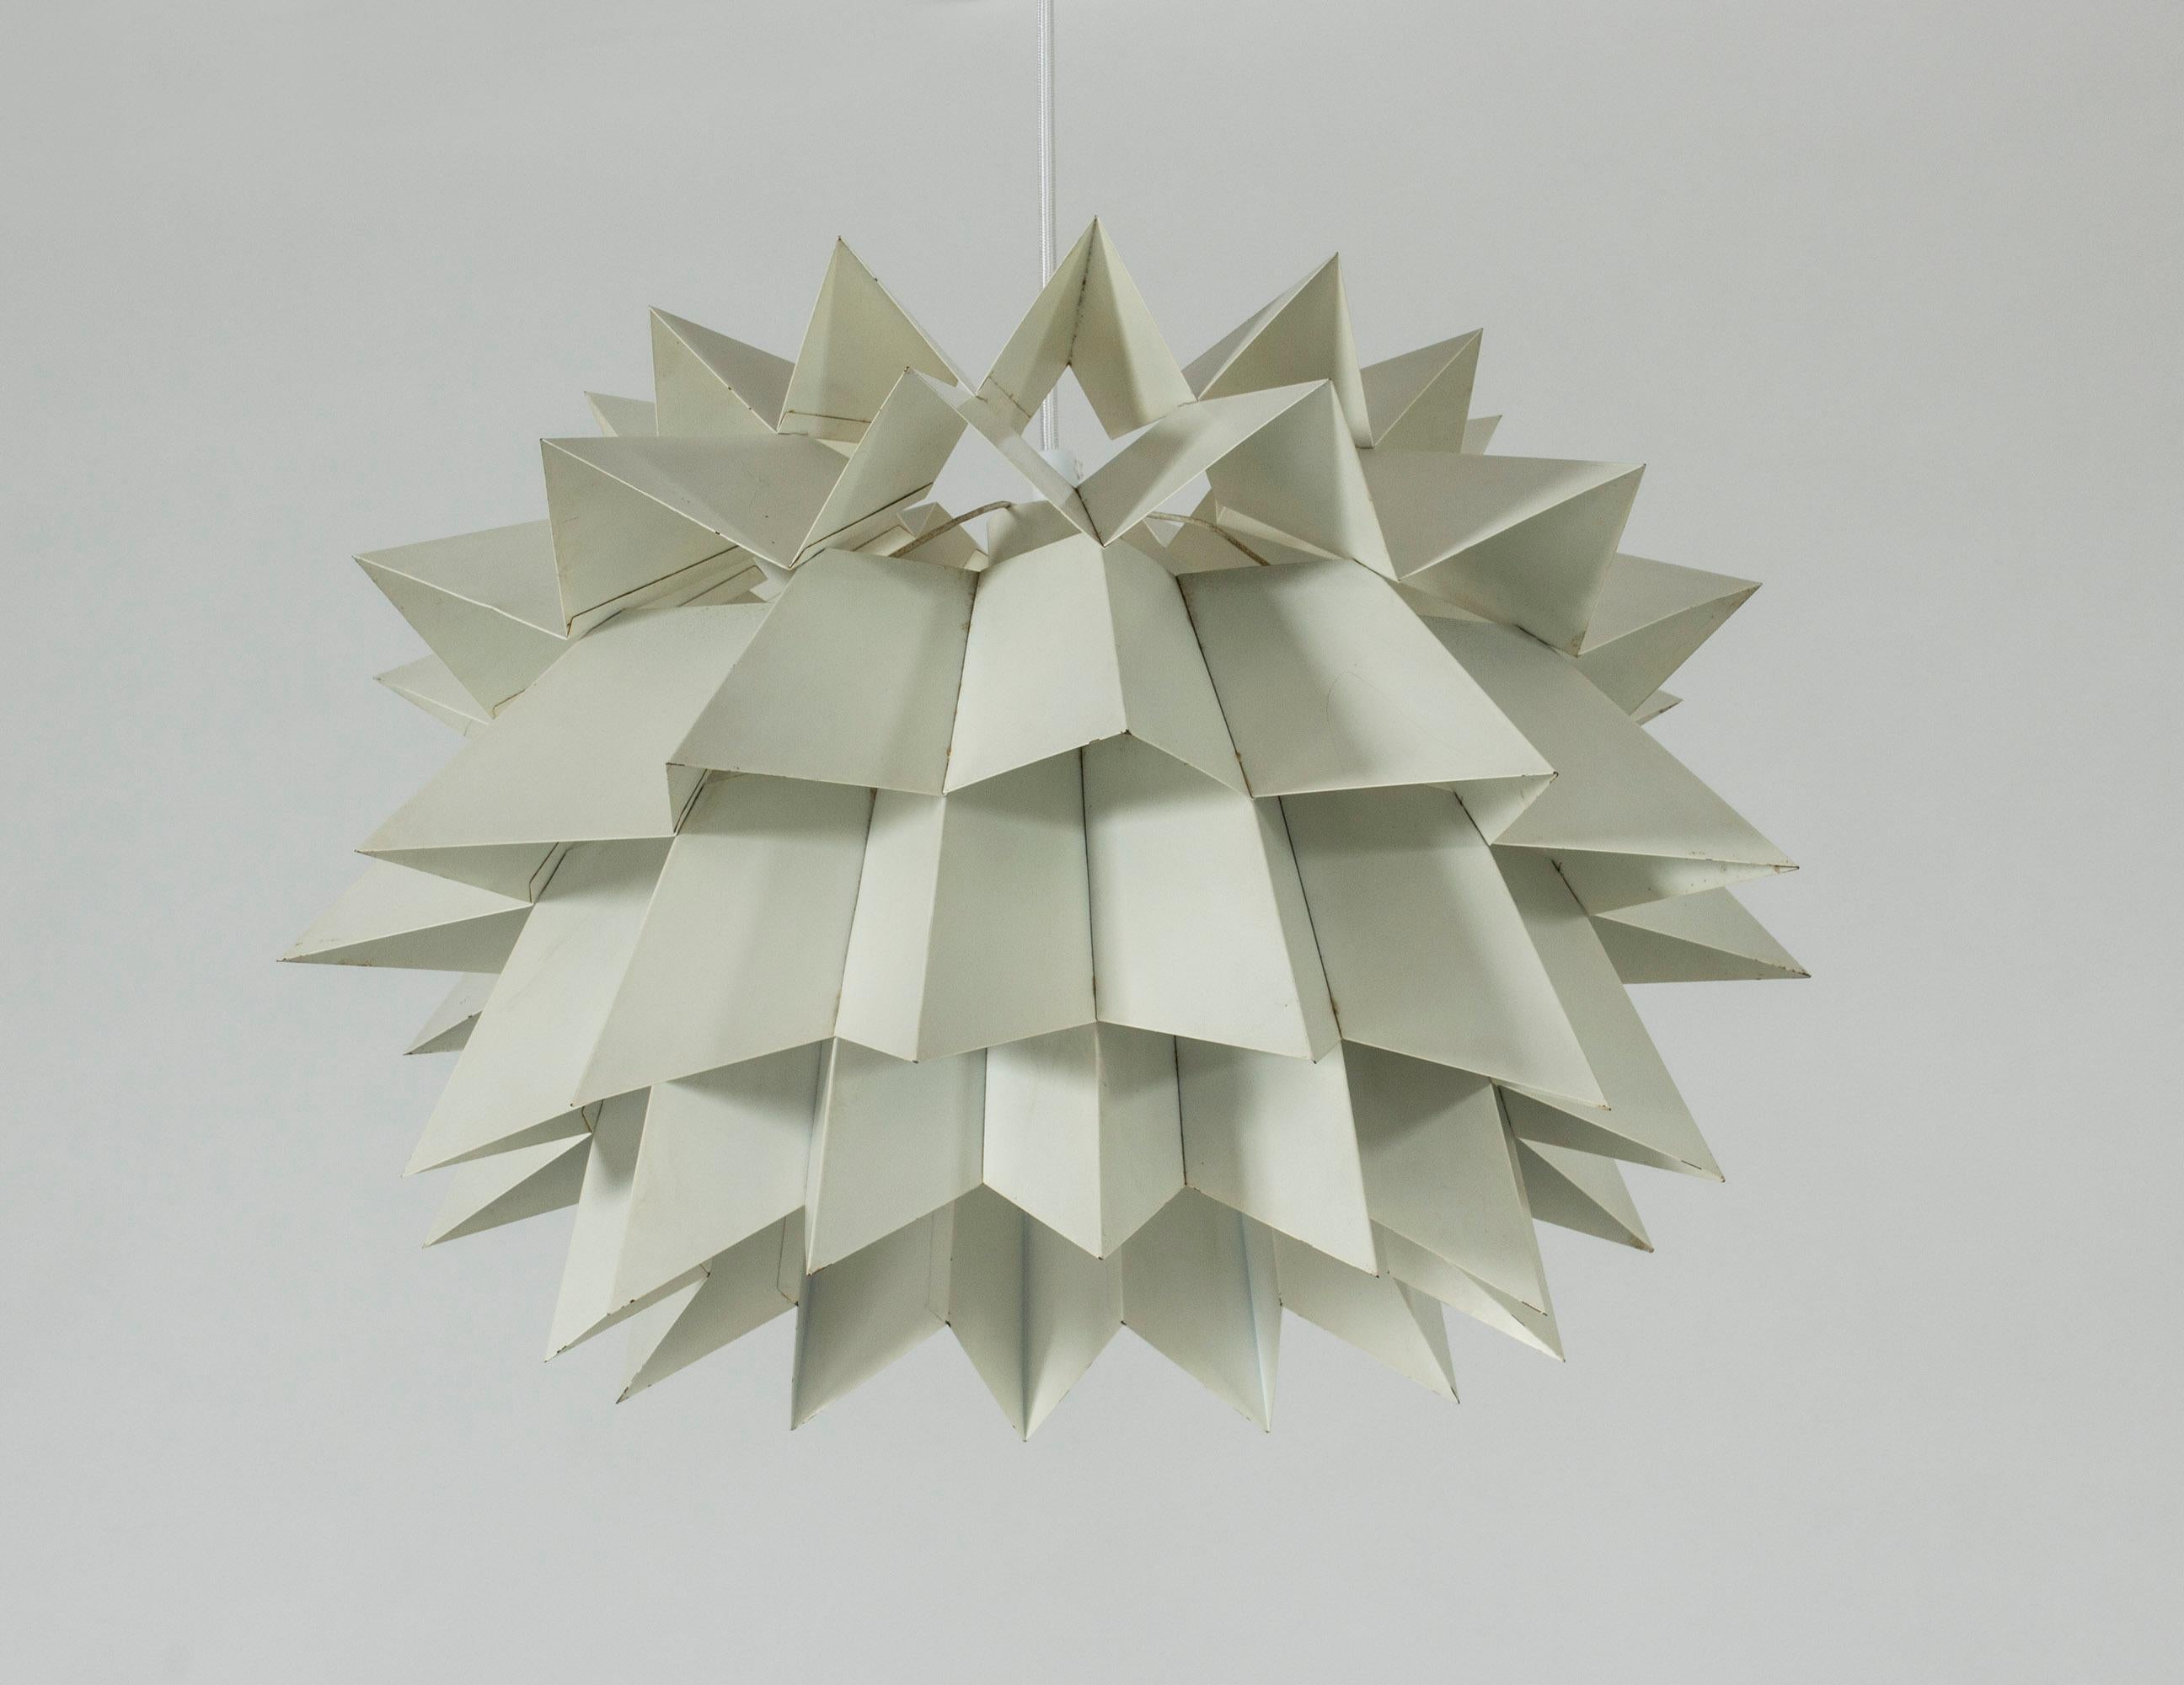 Striking “Starlight” pendant lamp, also referred to as “Sydney light”, by Anton Fogh Holm and Alfred J. Andersen. Lacquered crisp white.